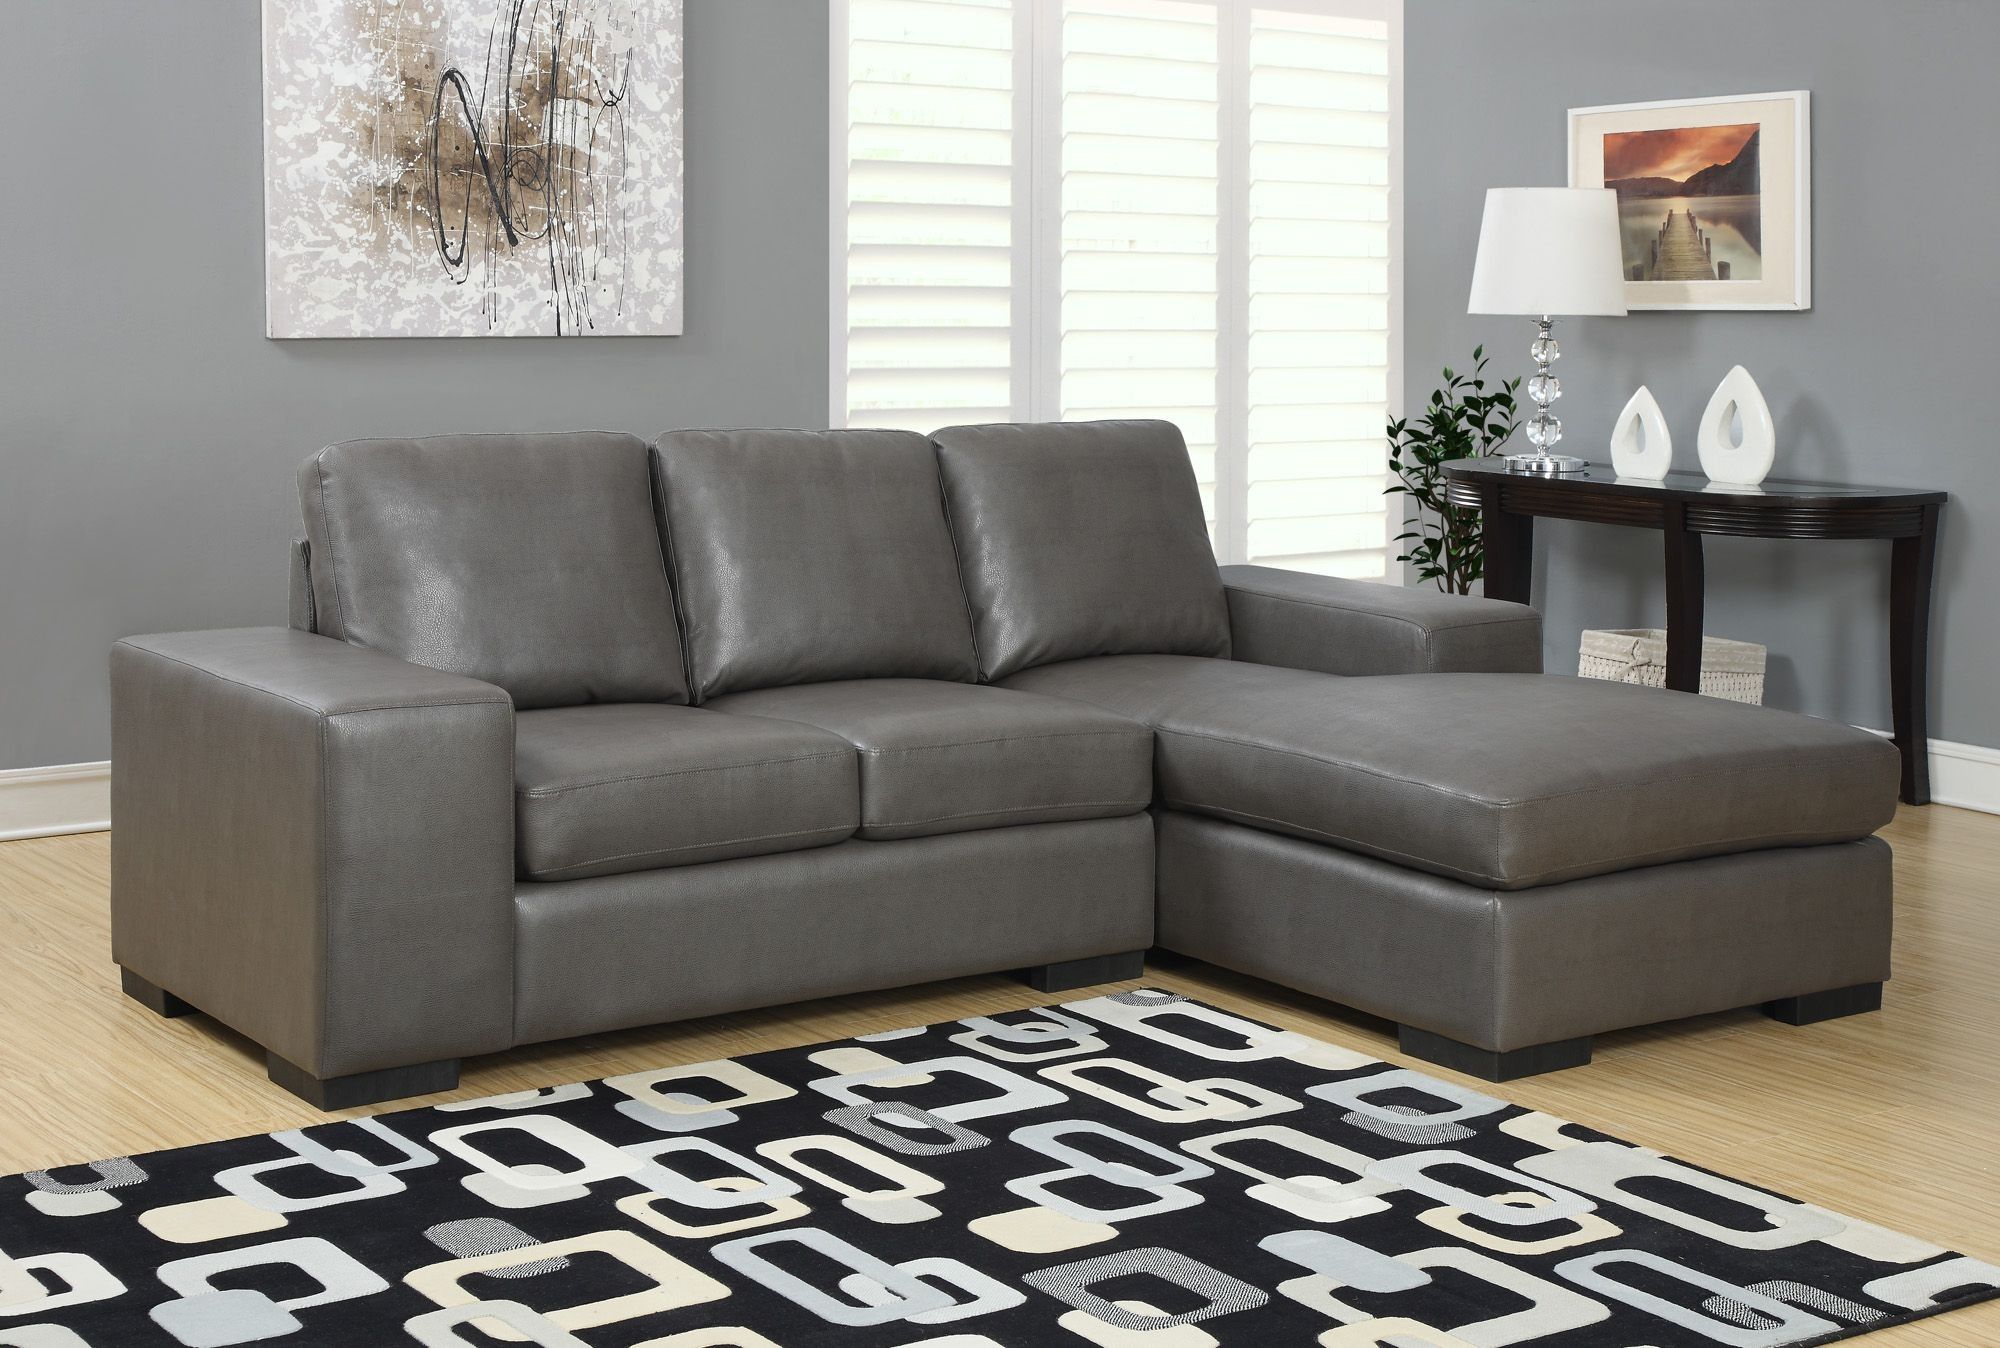 Charcoal Gray Bonded Leather/Match Sofa Sectional From Regarding Sectional Sofas In Gray (View 7 of 15)